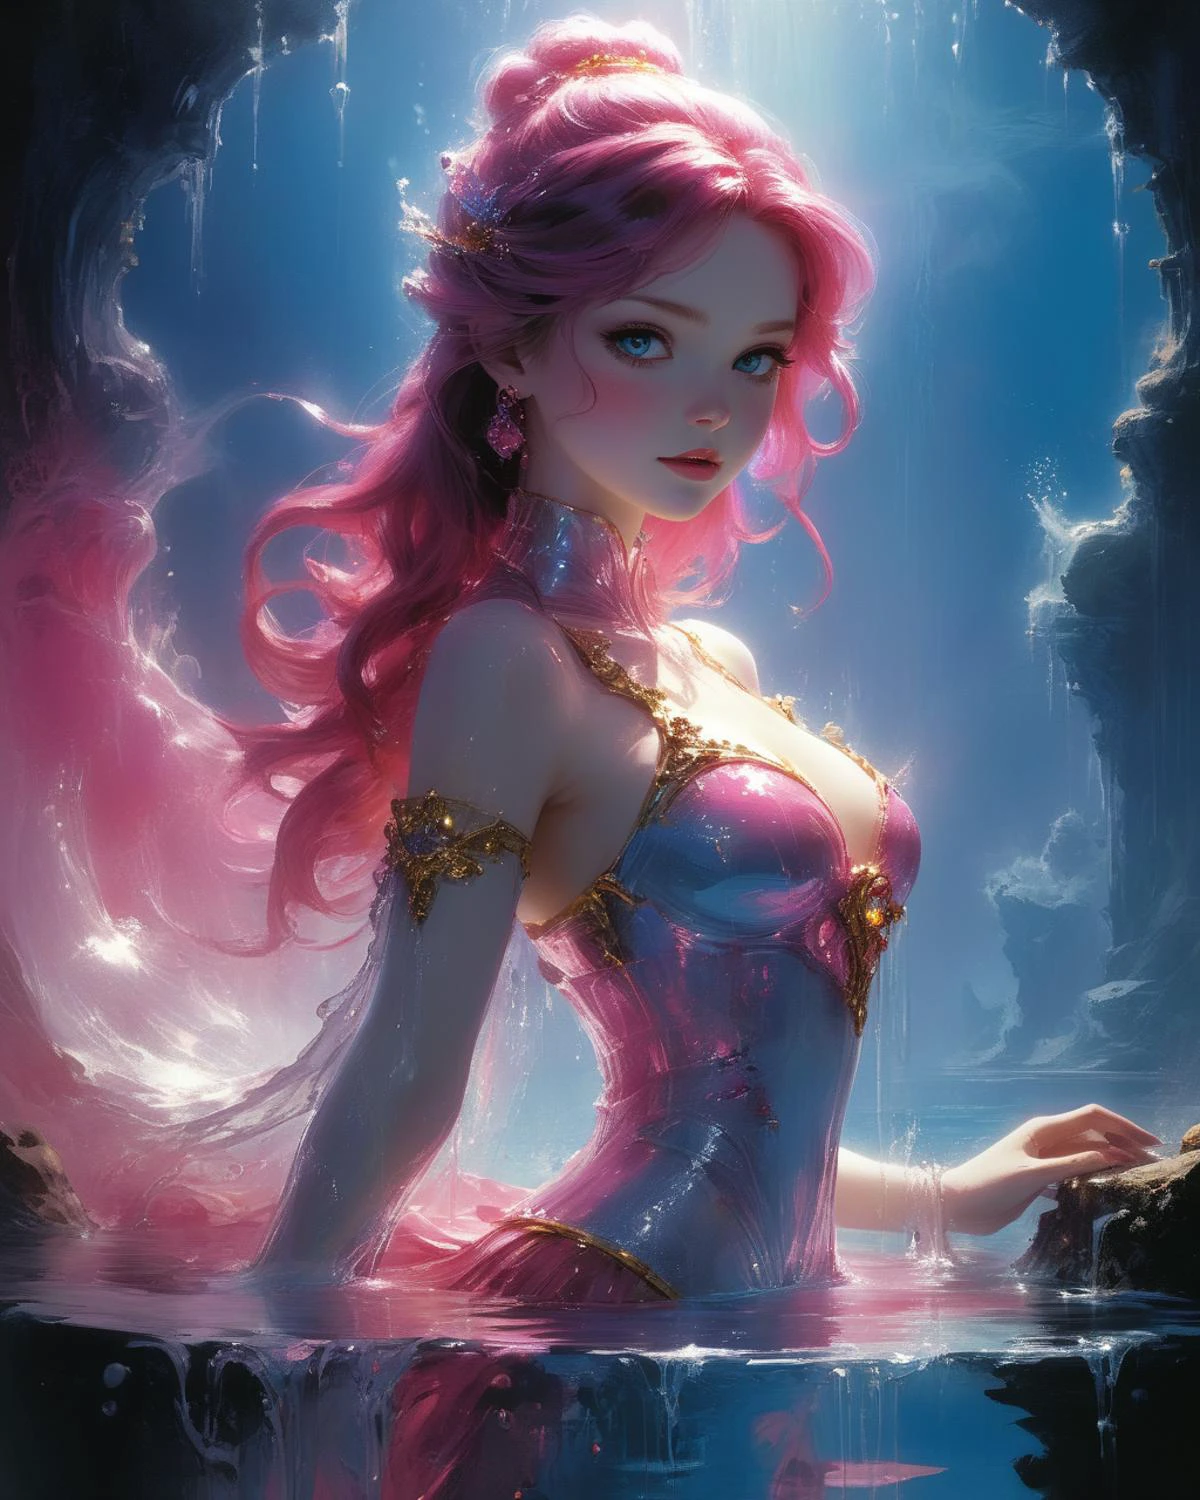 full body air elemental of transparent water with a blue and white tinge, (reflected light:1.5), golden eyes, fountain with splashing water, (chiaroscuro:1.4), hyper realistic photo, hot pink, bioluminescence, transparency, John Berkey Style page, disney princess